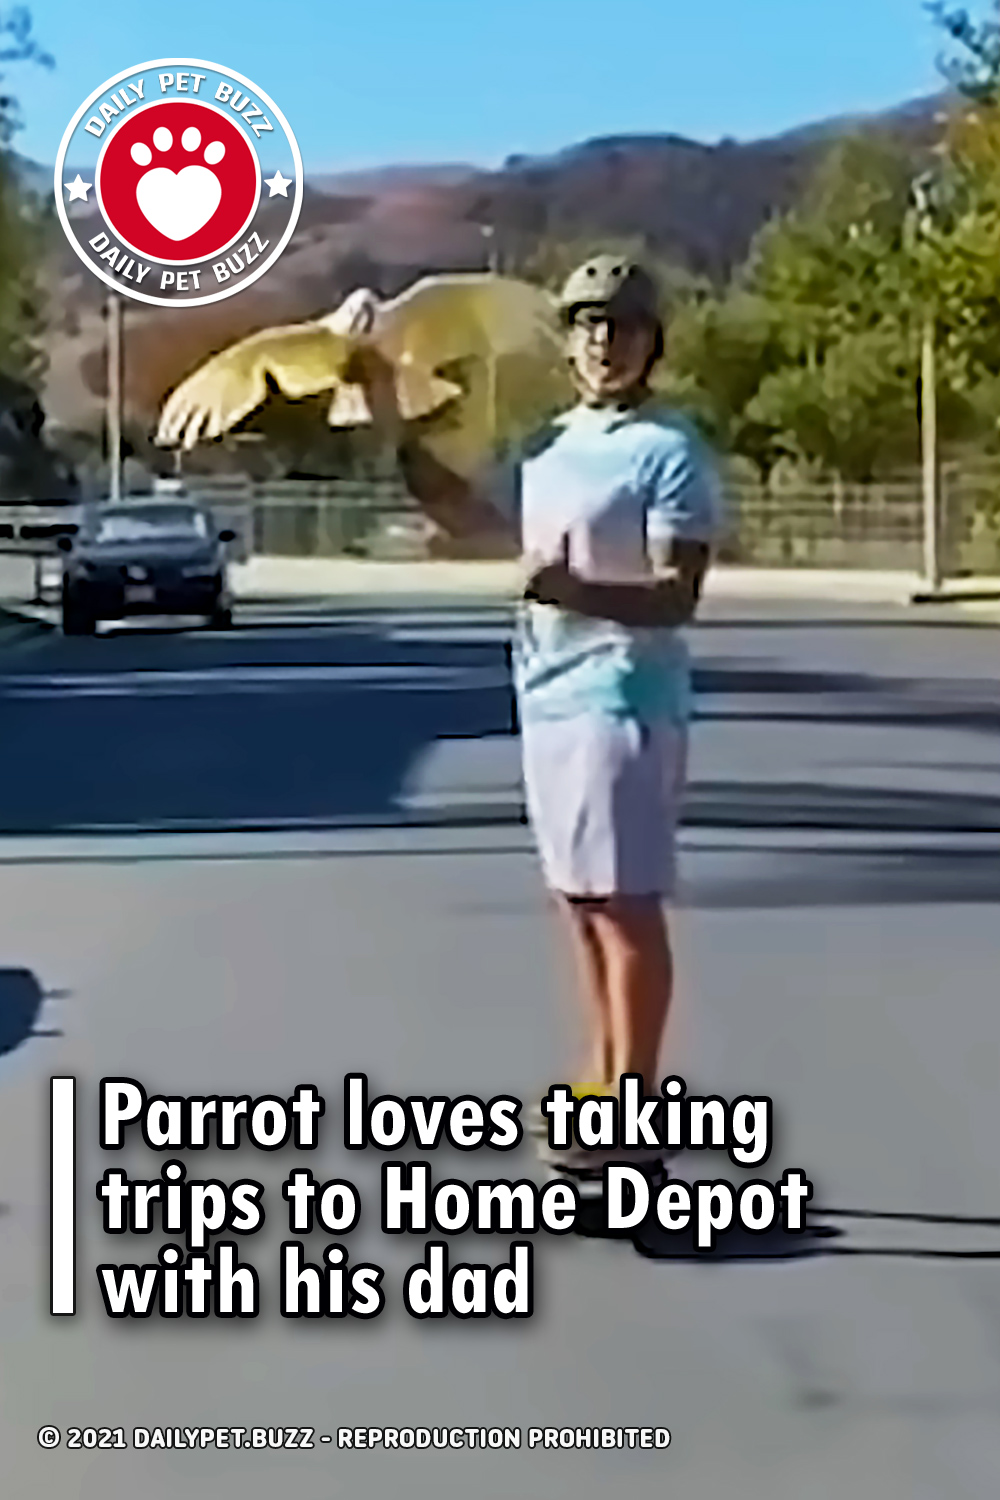 Parrot loves taking trips to Home Depot with his dad